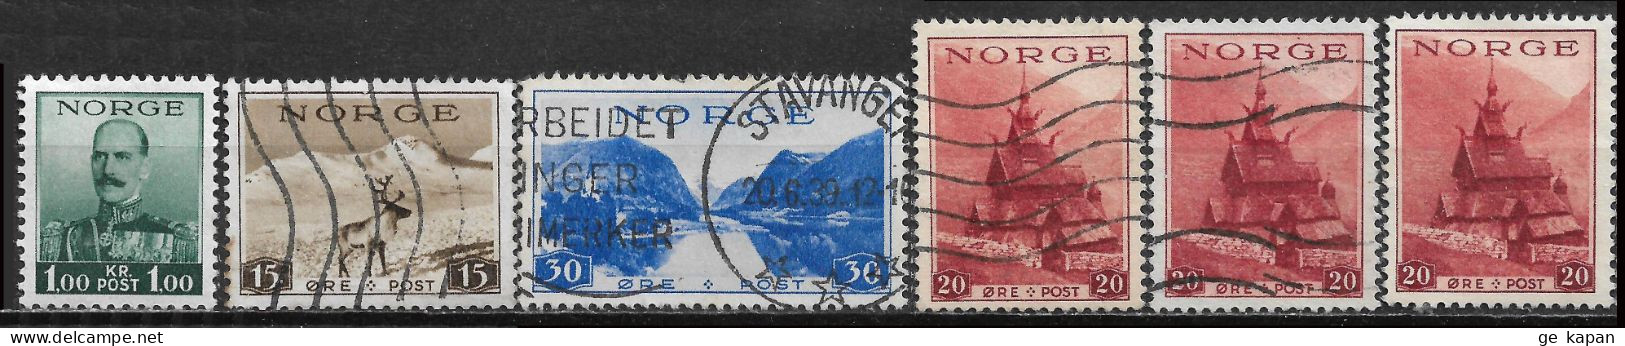 1937-1939 NORWAY SET OF 6 USED STAMPS (Michel # 191,195,197,201x) CV €4.70 - Usati